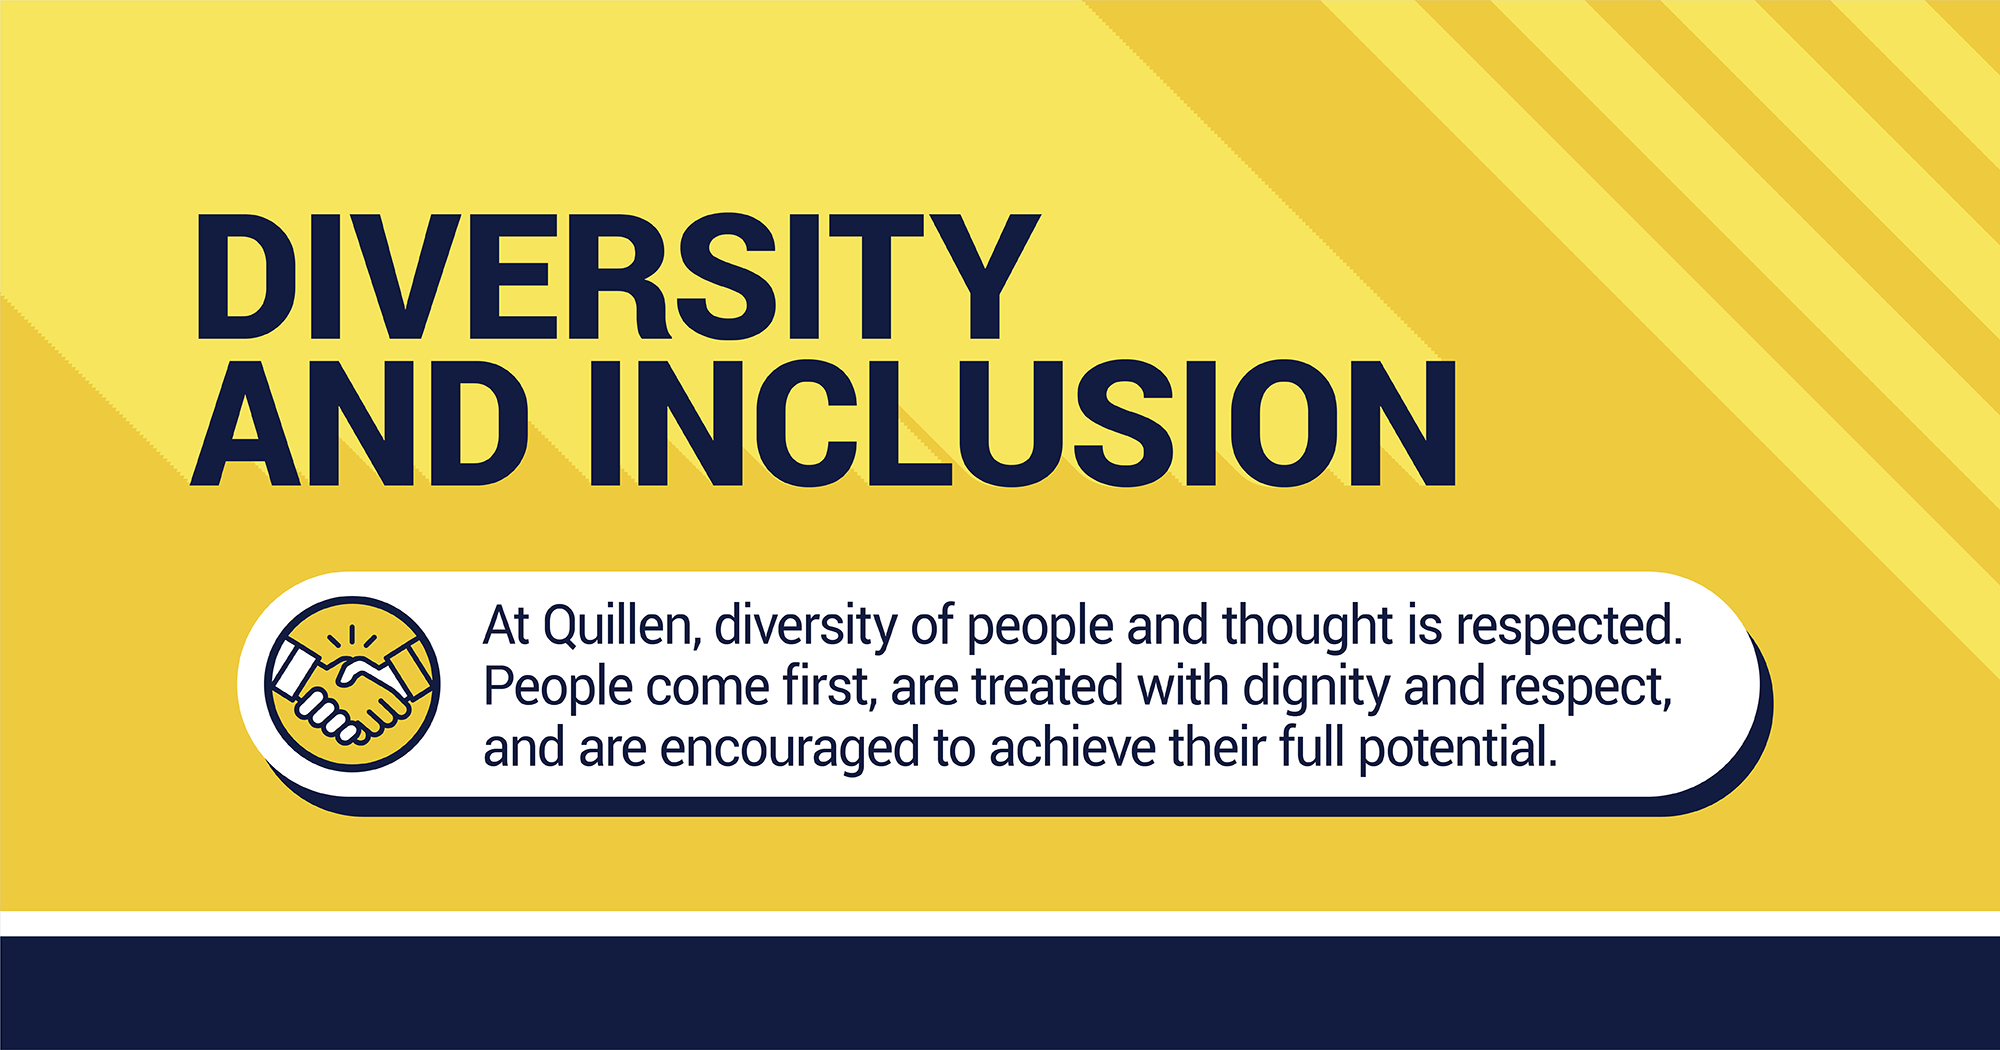 Diversity and inclusion are essential at Quillen College of Medicine